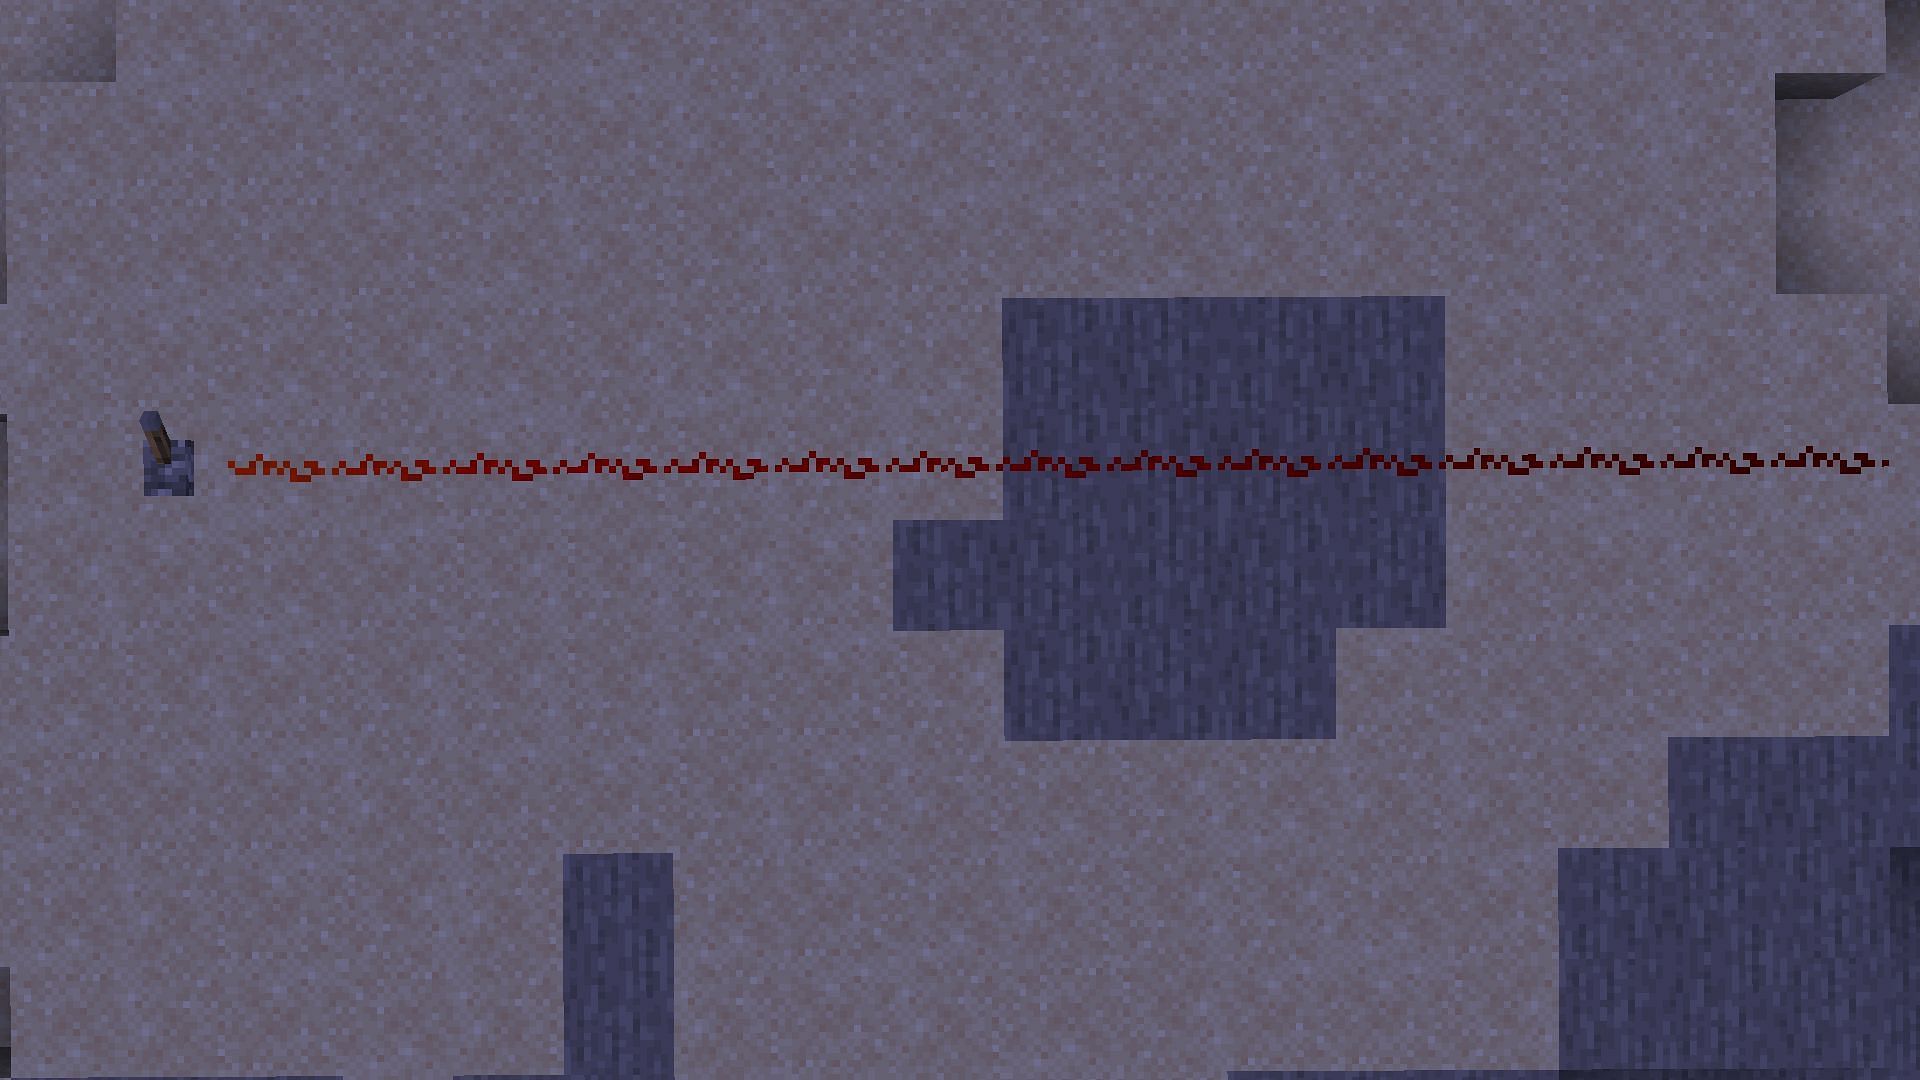 The item sends a redstone signal of 15 power level, meaning the signal reaches 15 blocks from the source (Image via Mojang)